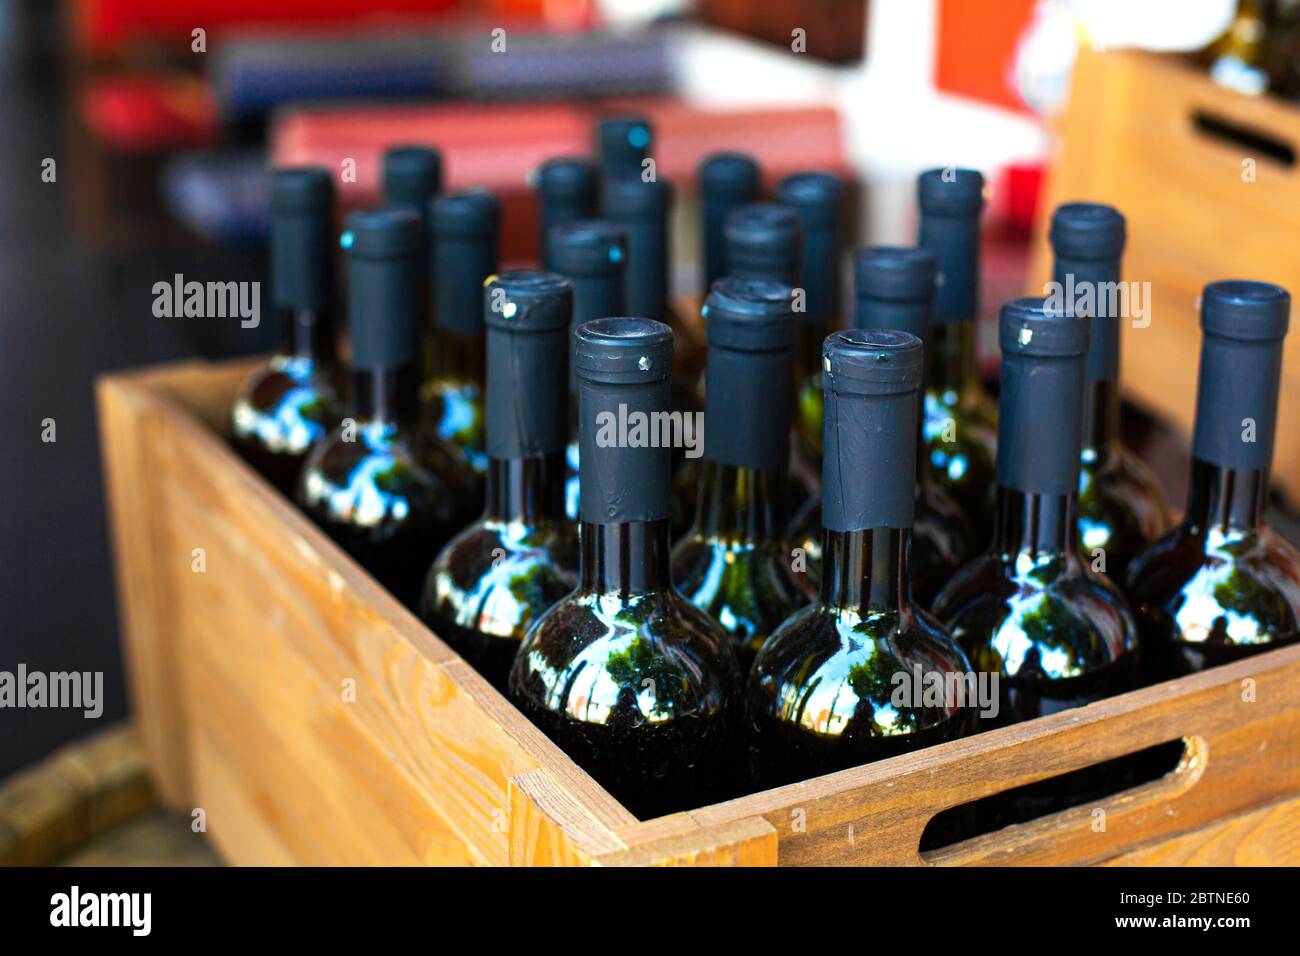 Download Wooden Wine Box High Resolution Stock Photography And Images Alamy Yellowimages Mockups